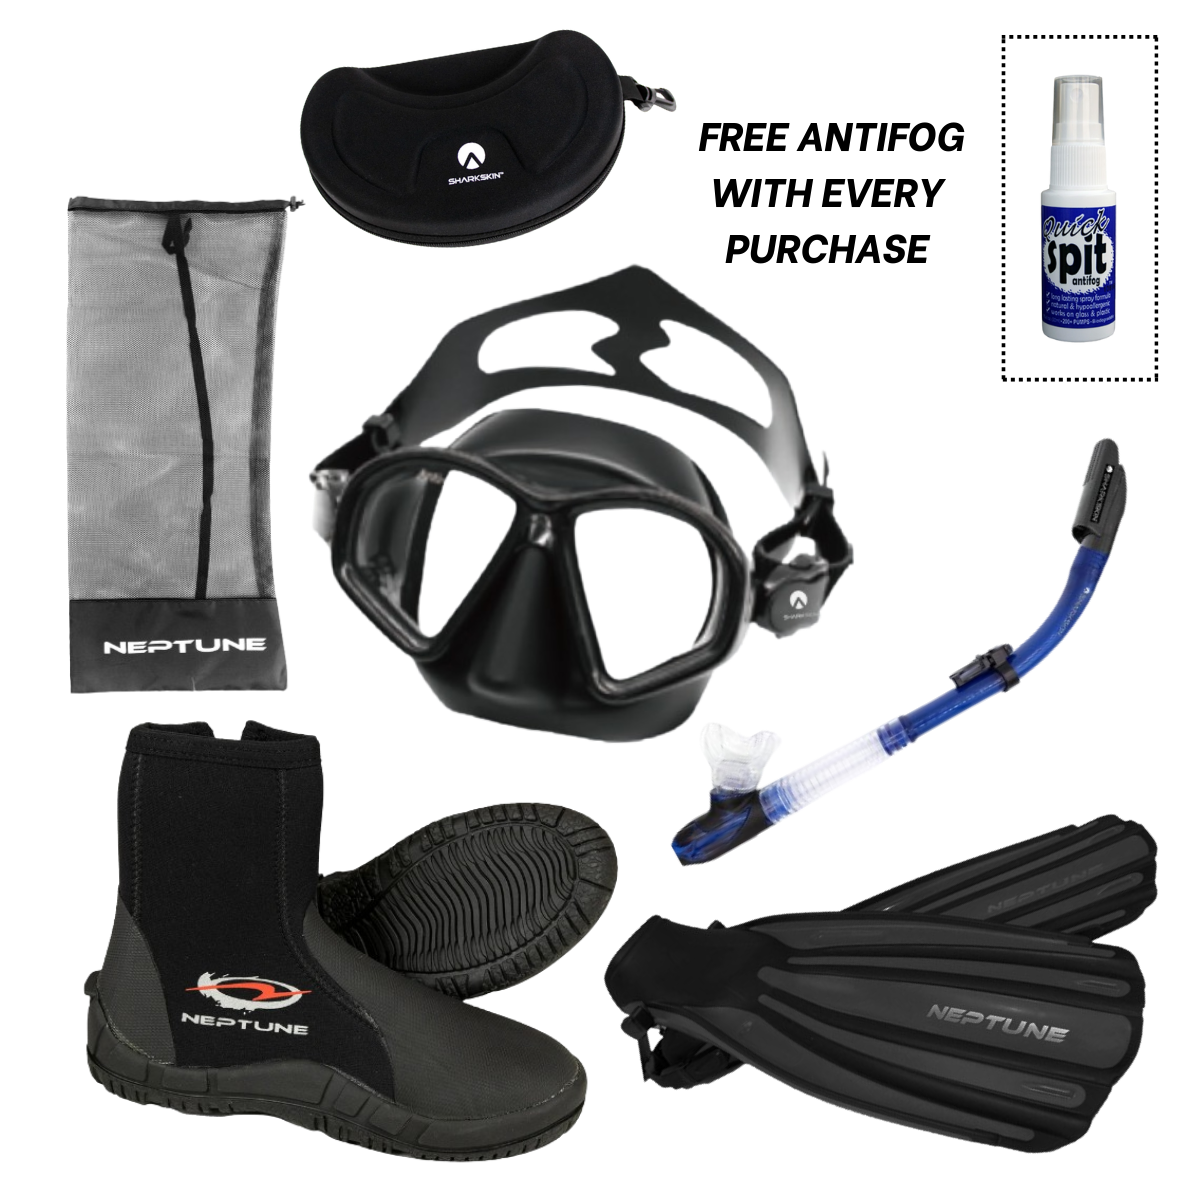 Sharkskin Accelerate Extreme SeaClear Mask, EasyClear Splash Guard Snorkel Neptune Explorer Dive Boots, F4 Accelerate Fin Package + Free Anti-fog